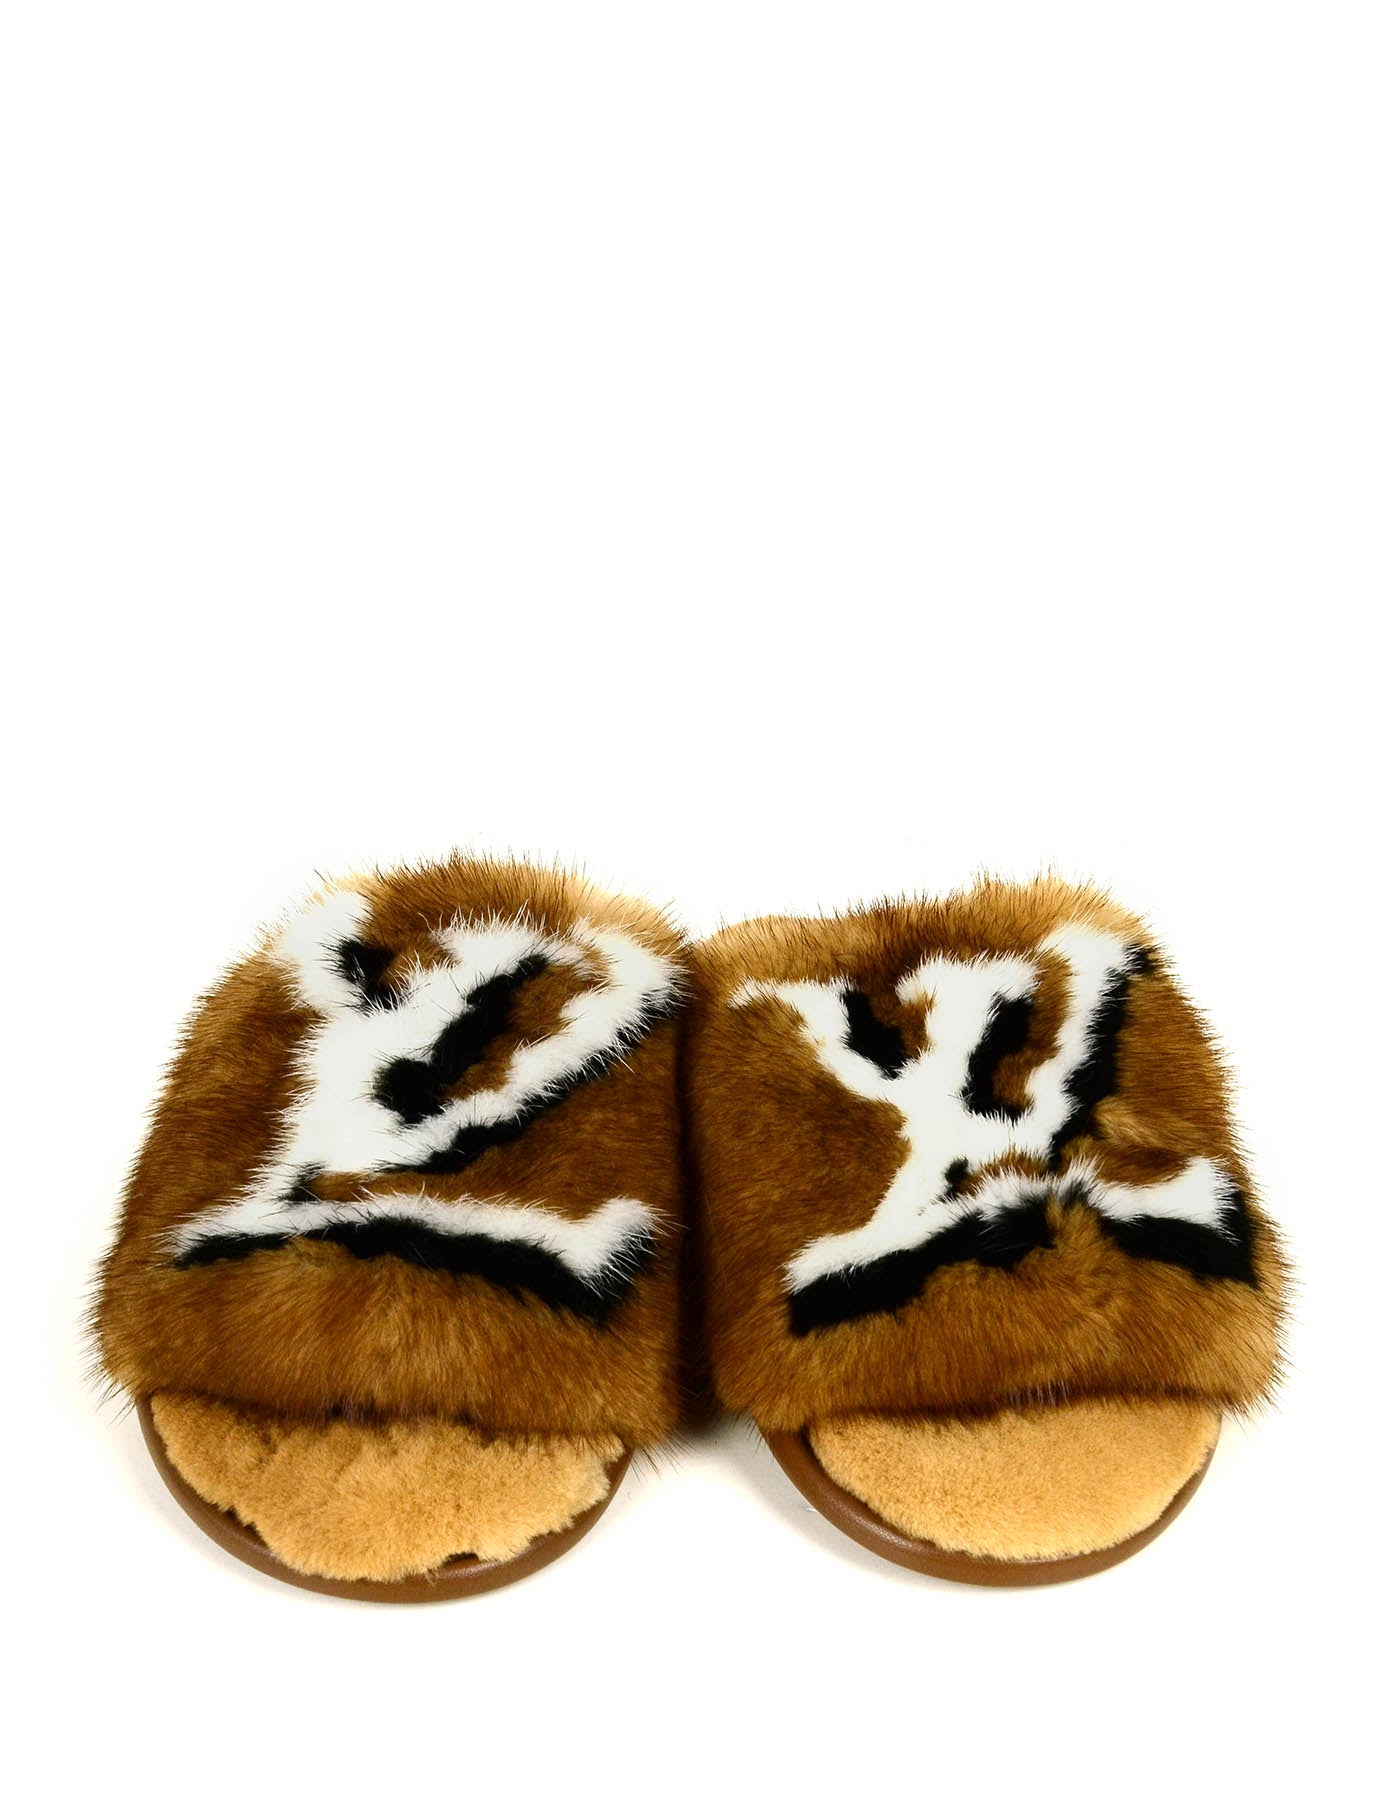 Buy Louis Vuitton LOUISVUITTON Size: 41-42 Homey Line Mule LV Logo Mink Fur  Room Shoes from Japan - Buy authentic Plus exclusive items from Japan